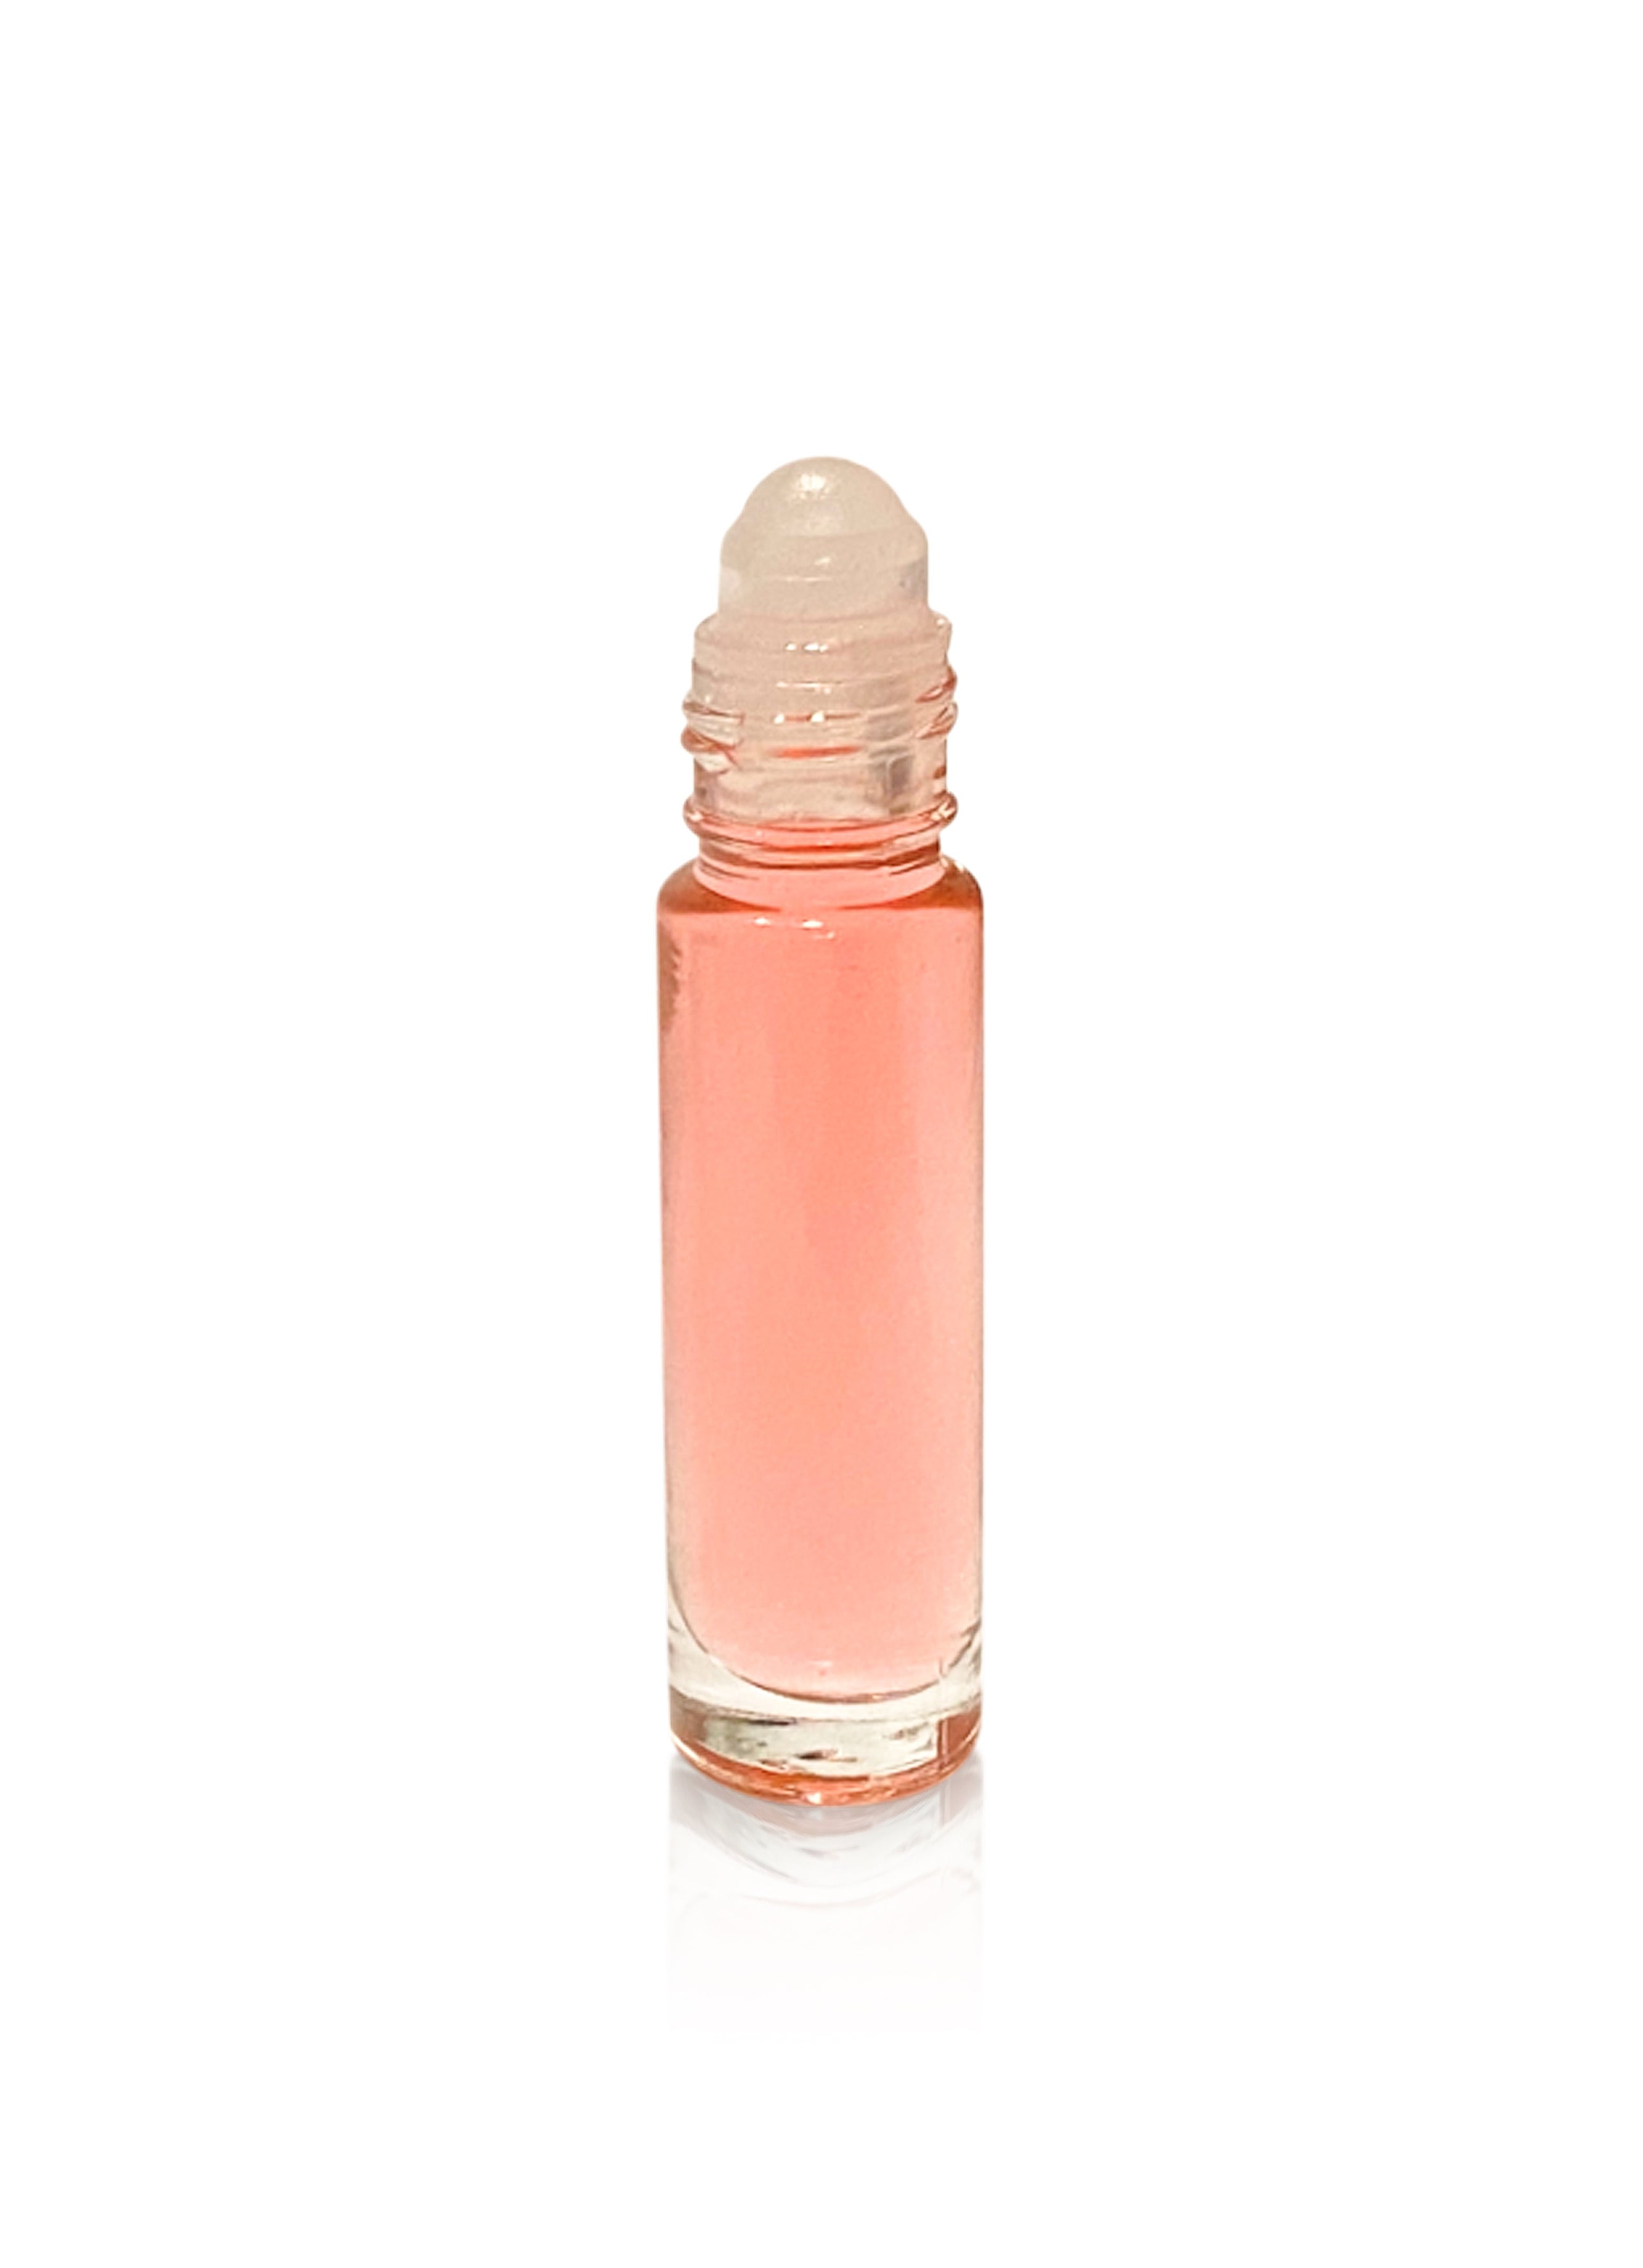 Pink Sugar - Type for Women Perfume Body Oil Fragrance [Roll-On